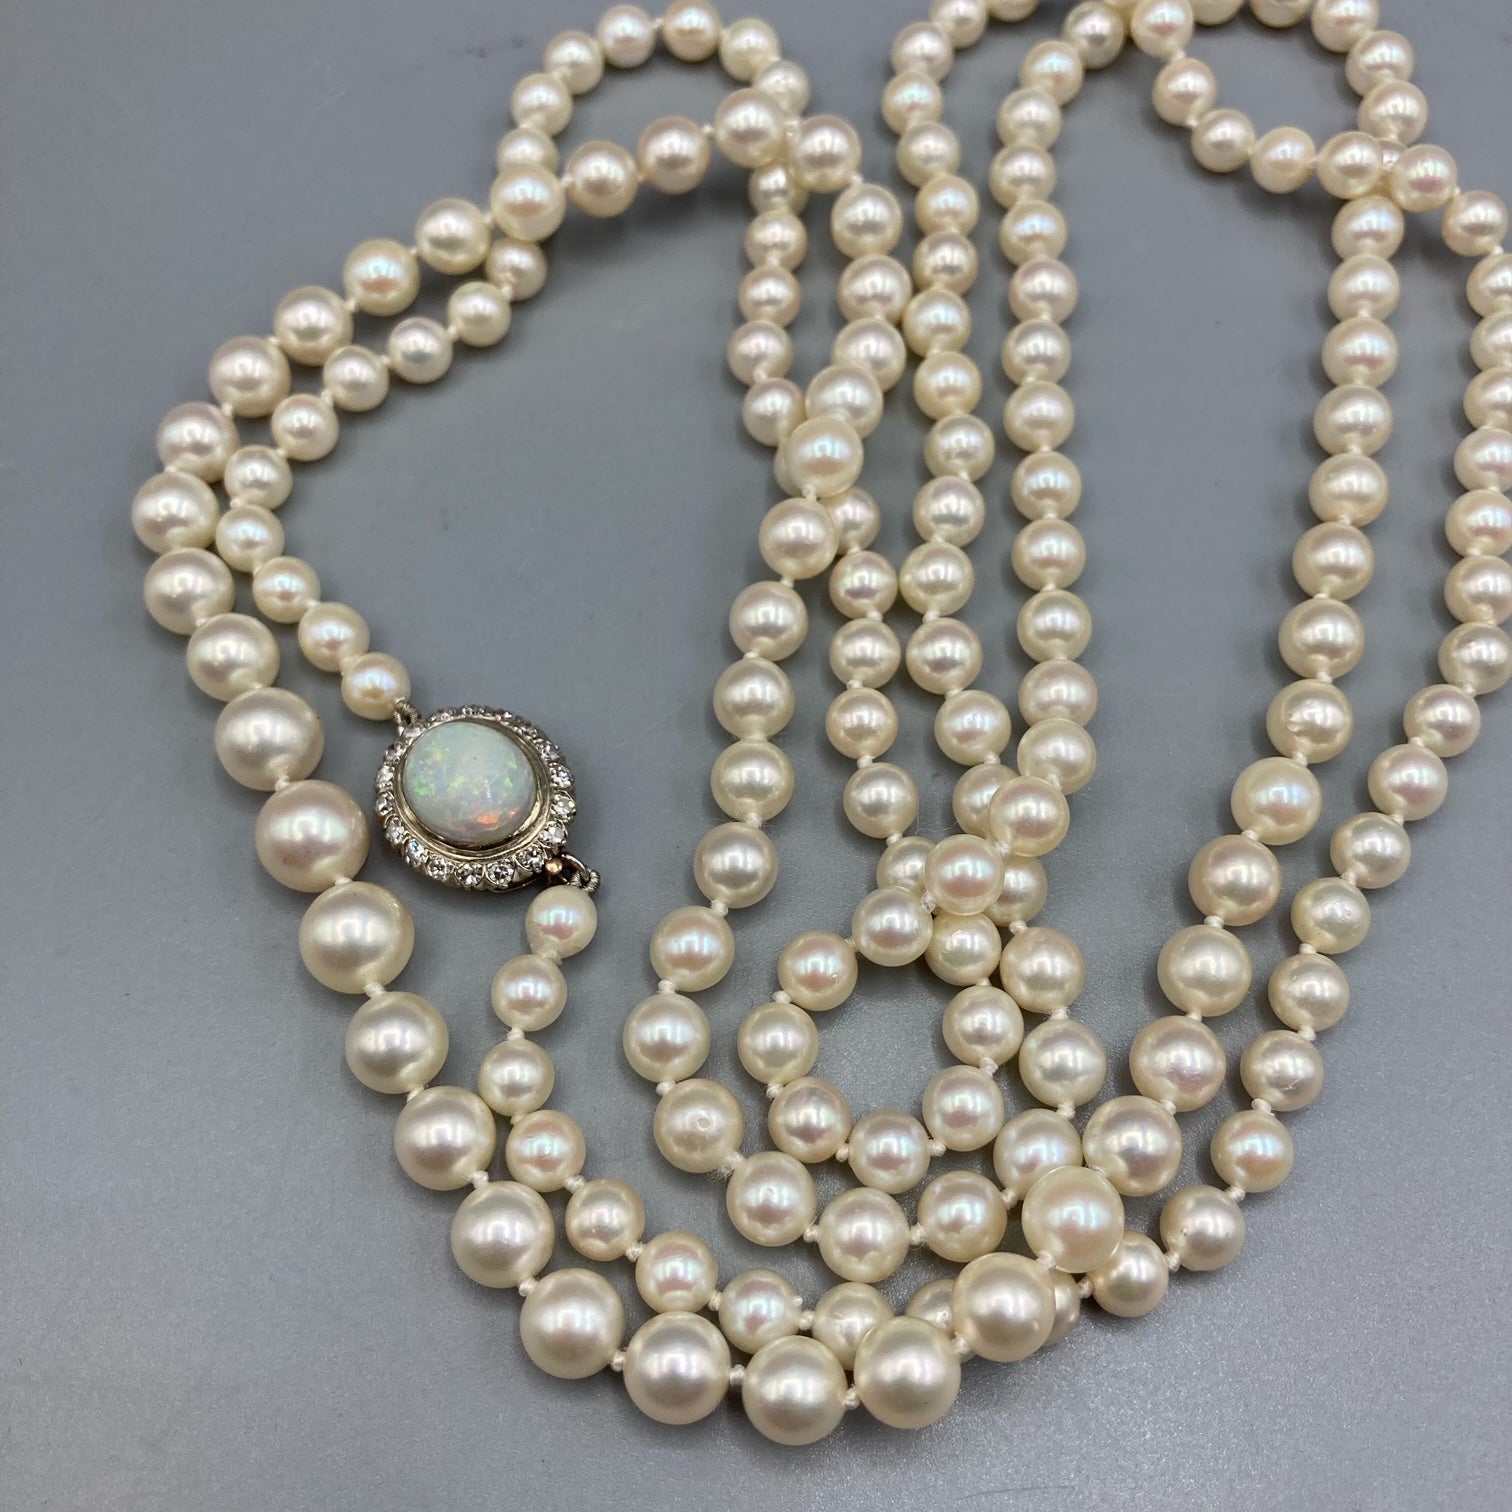 Graduated Cultured Pearl Vintage Necklace with White Opal Diamond Clasp